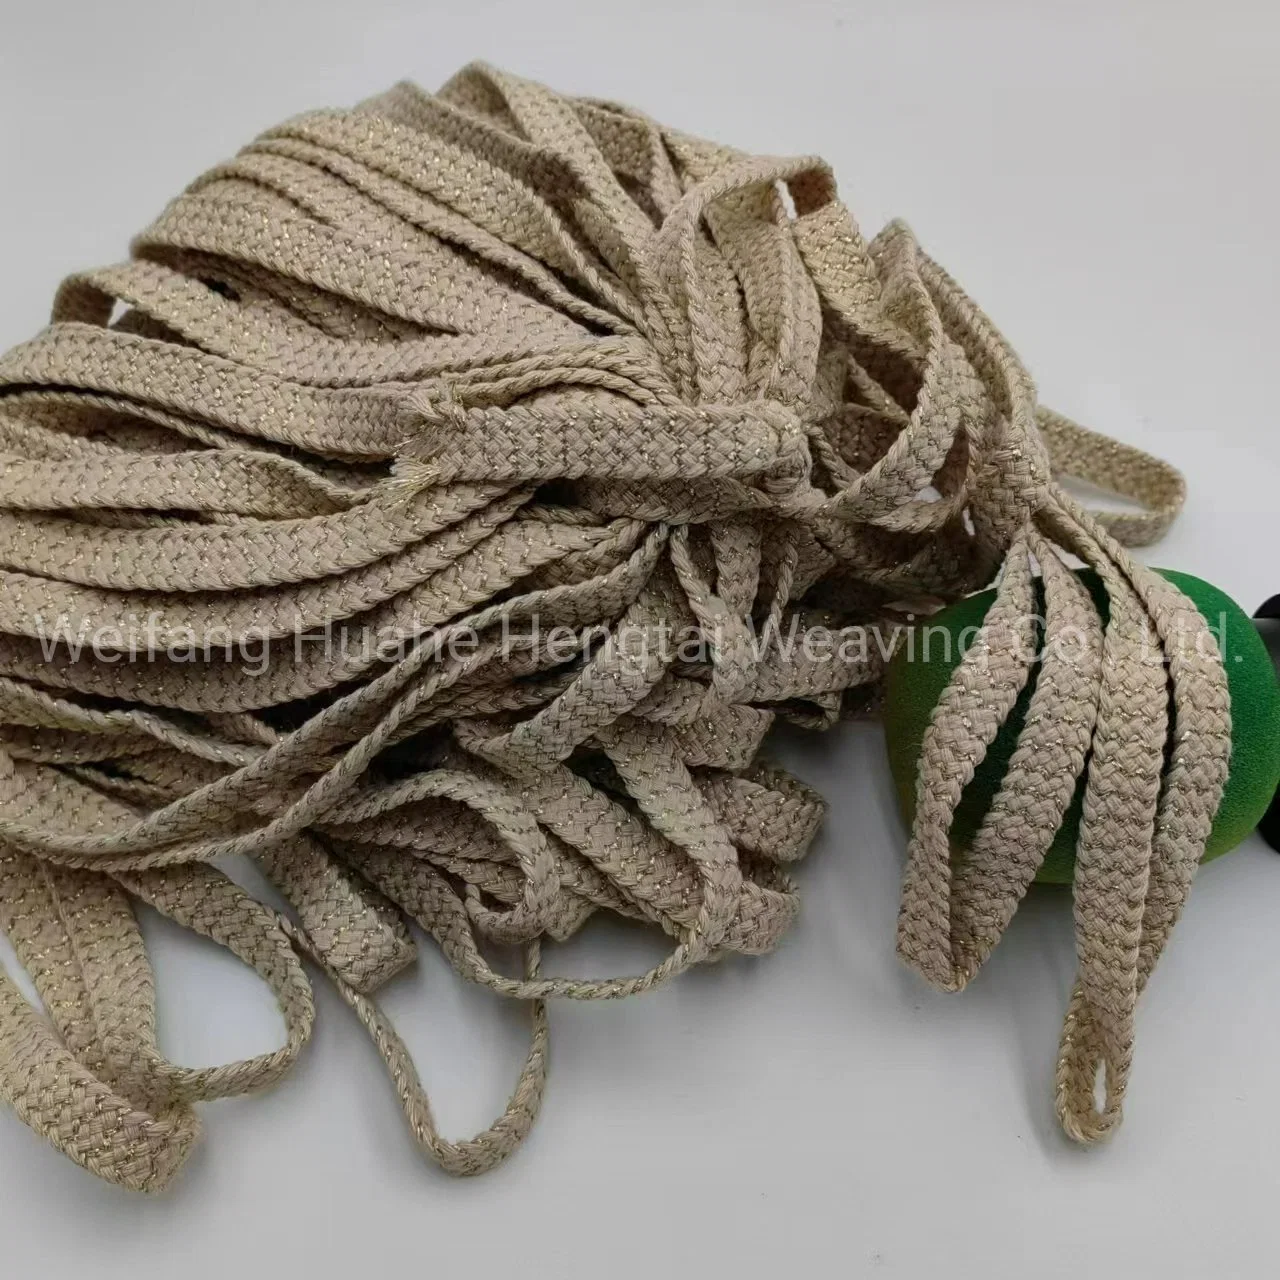 Chinese Gold Webbing Decorative Strip Clothing Accessories in Stock